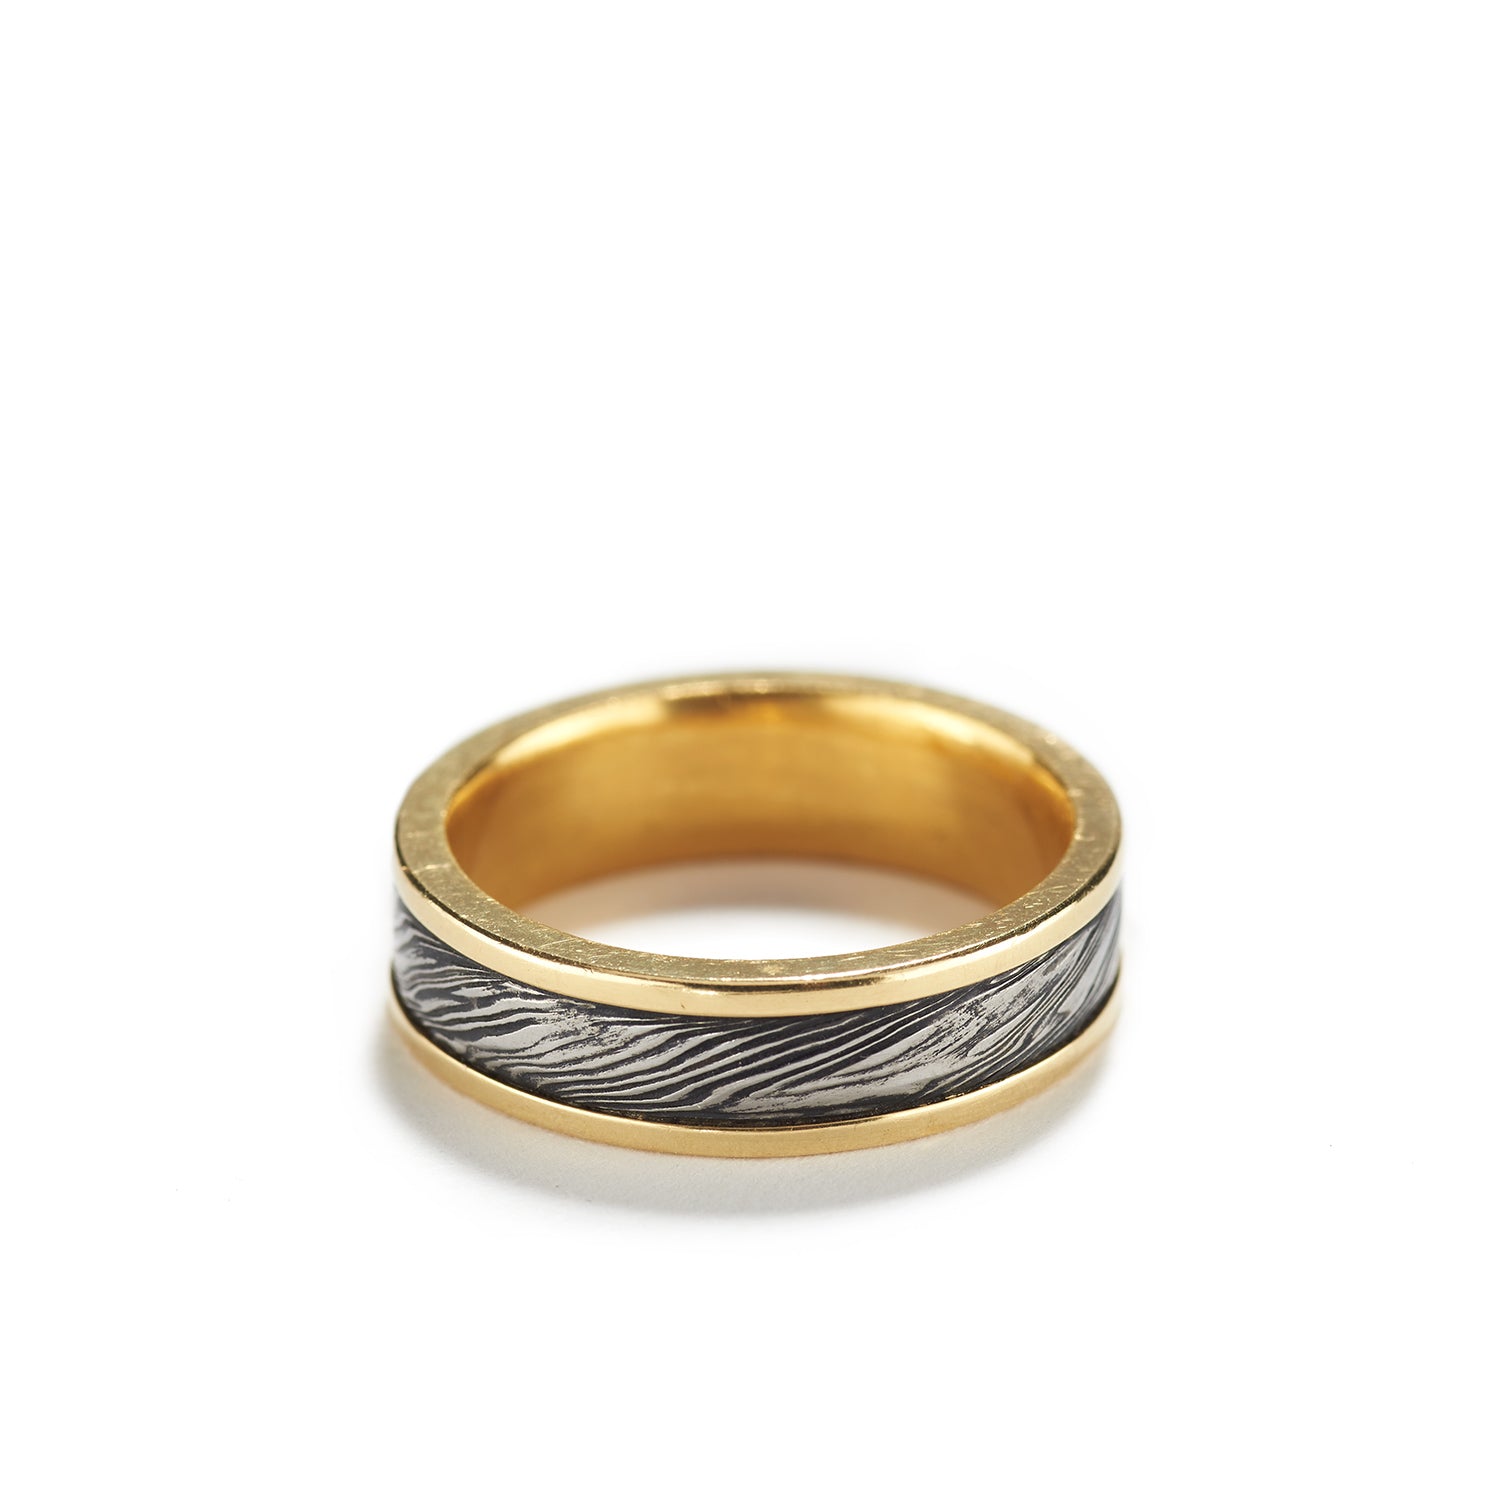 Damascus Steel Ring with Gold~5mm